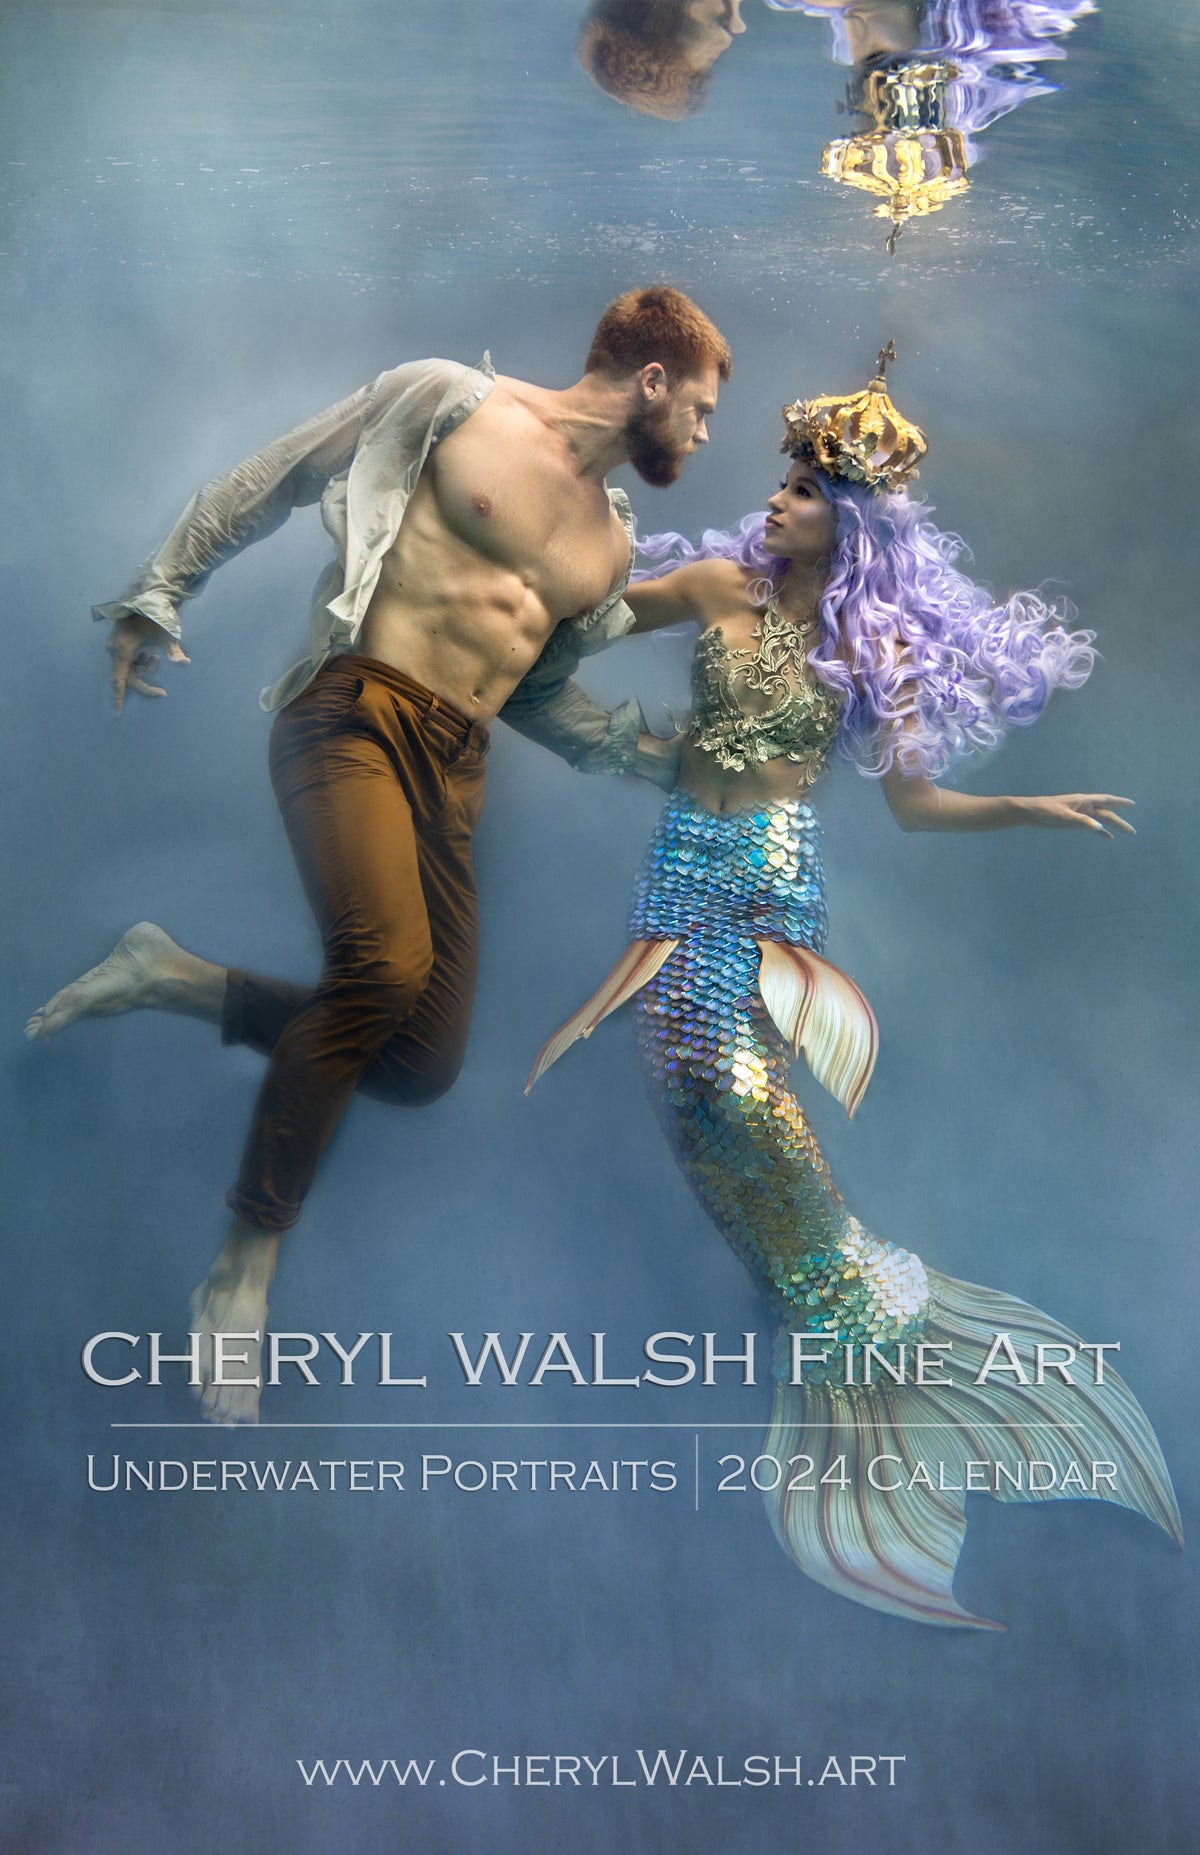 Handsome gentleman and lovely mermaid queen in partial embrace